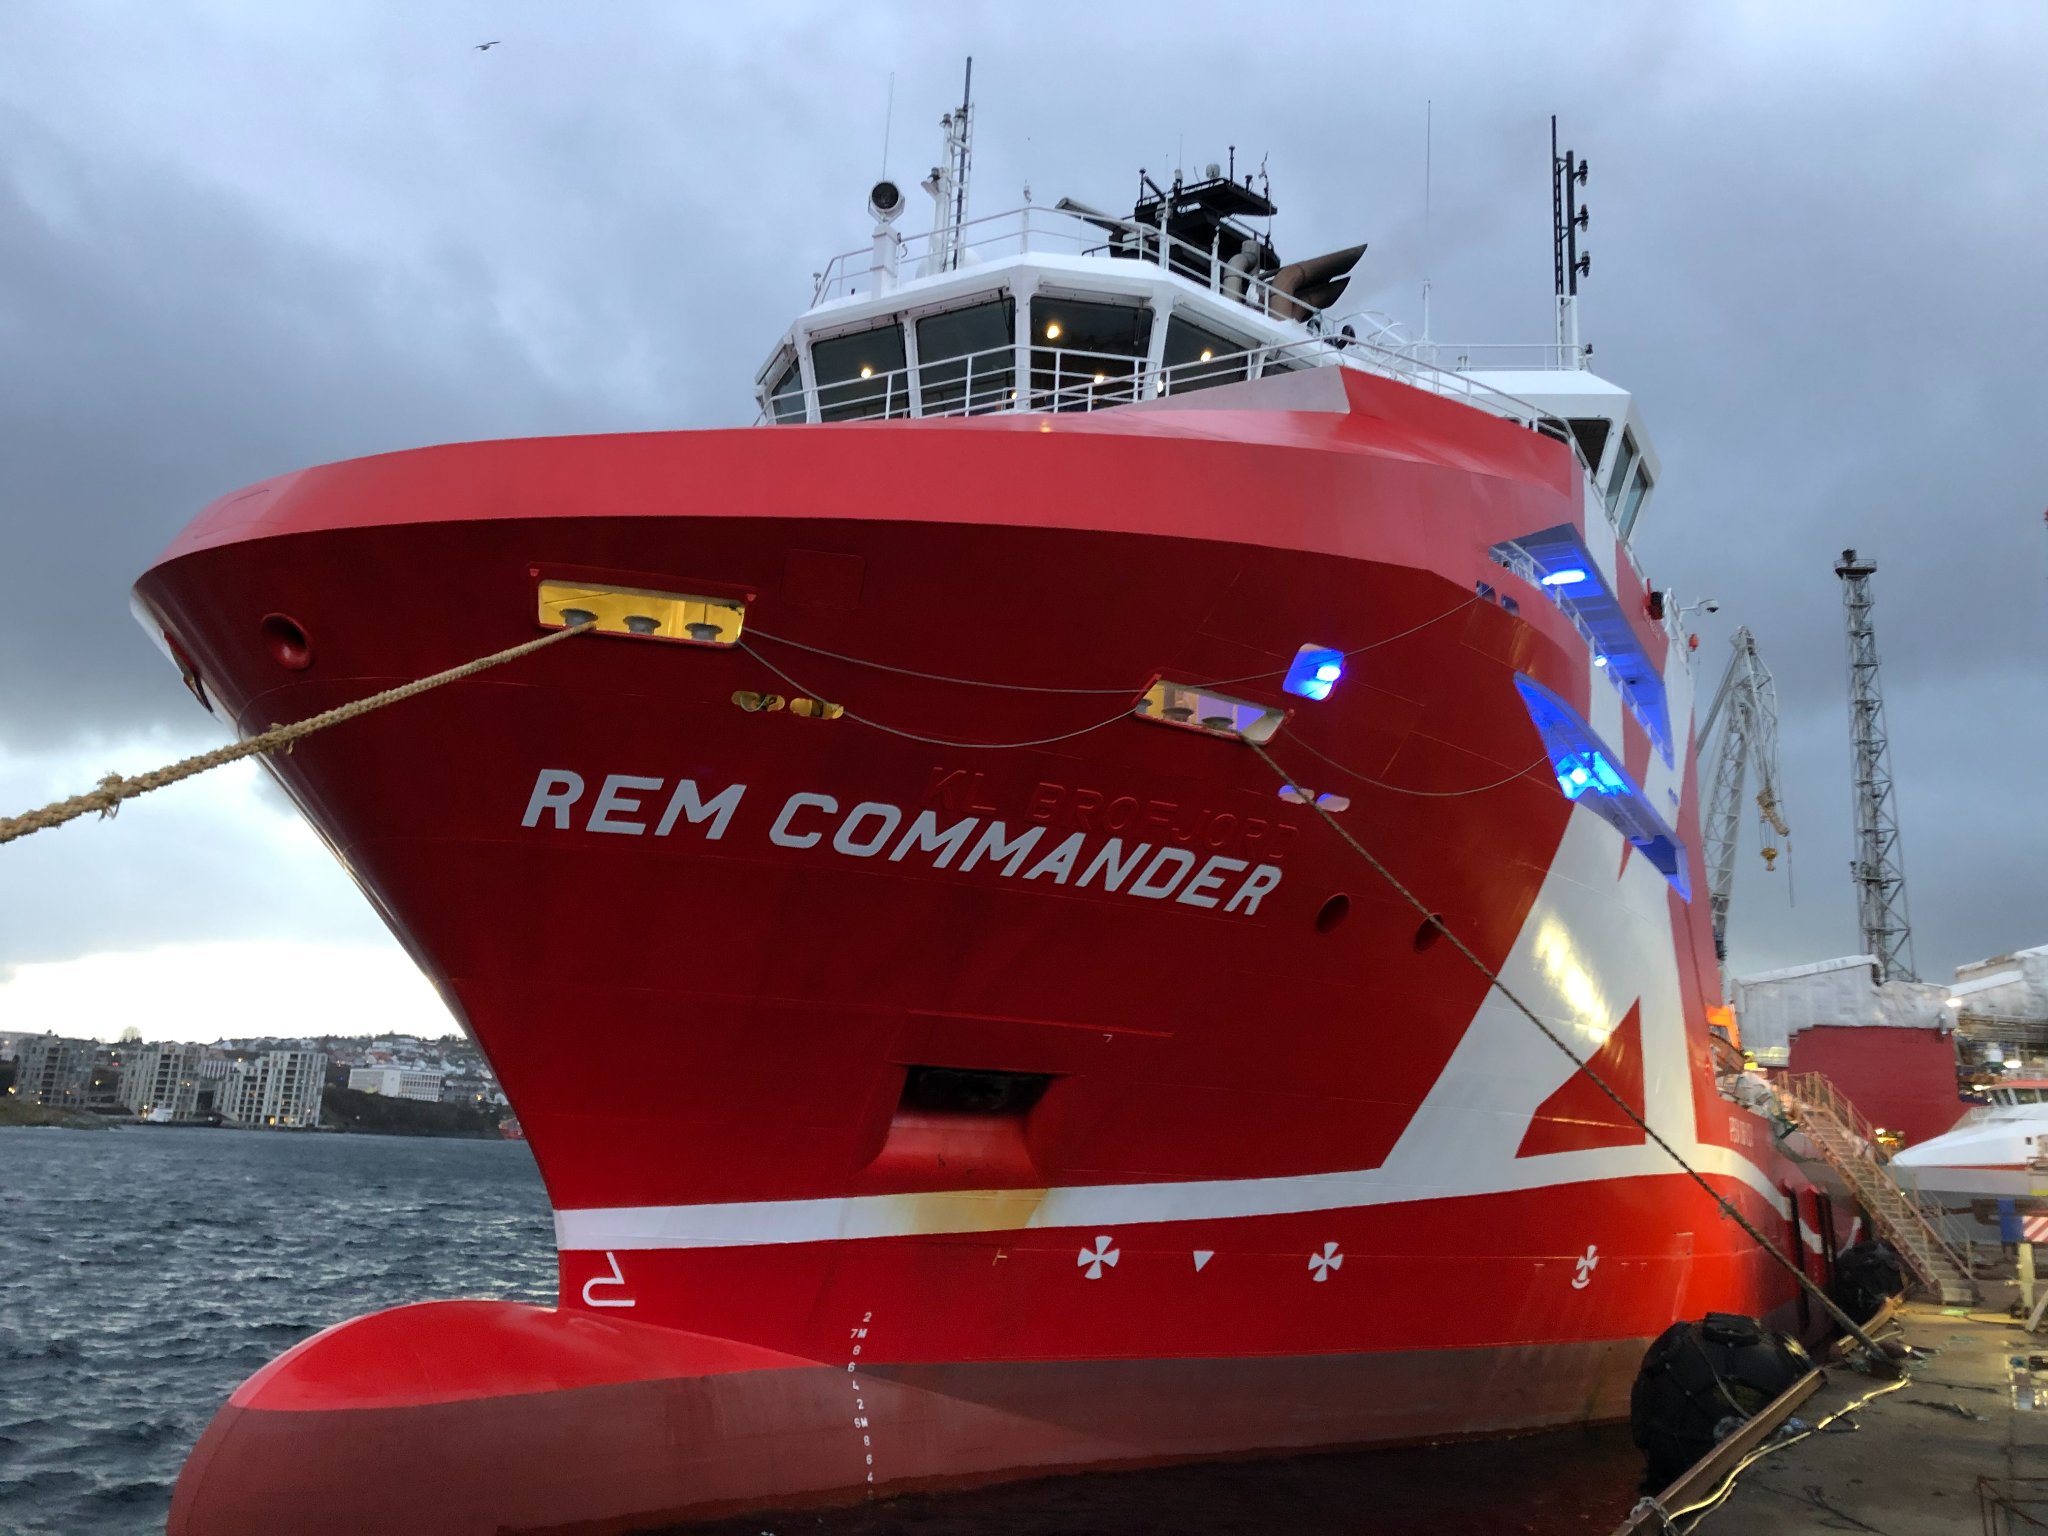 Rem Offshore secures contracts for three PSVs   Rem Arctic have been awarded a contract with Serica UK for 1 well + 4 optional wells. If all options are declared the duration of the program is estimated to approx. 220 days. Rem Fortress have been awarded a contract with Ithaca UK for a well program estimated to last for approx. 700 days. Rem Supporter have been awarded a contract with Saipem Ltd for the wind farm project Neart Na Gaoite. Contract is 345 days firm + options. In addition, Equinor have extended Rem Commander until the 29th of September, and have one more option in their favors.